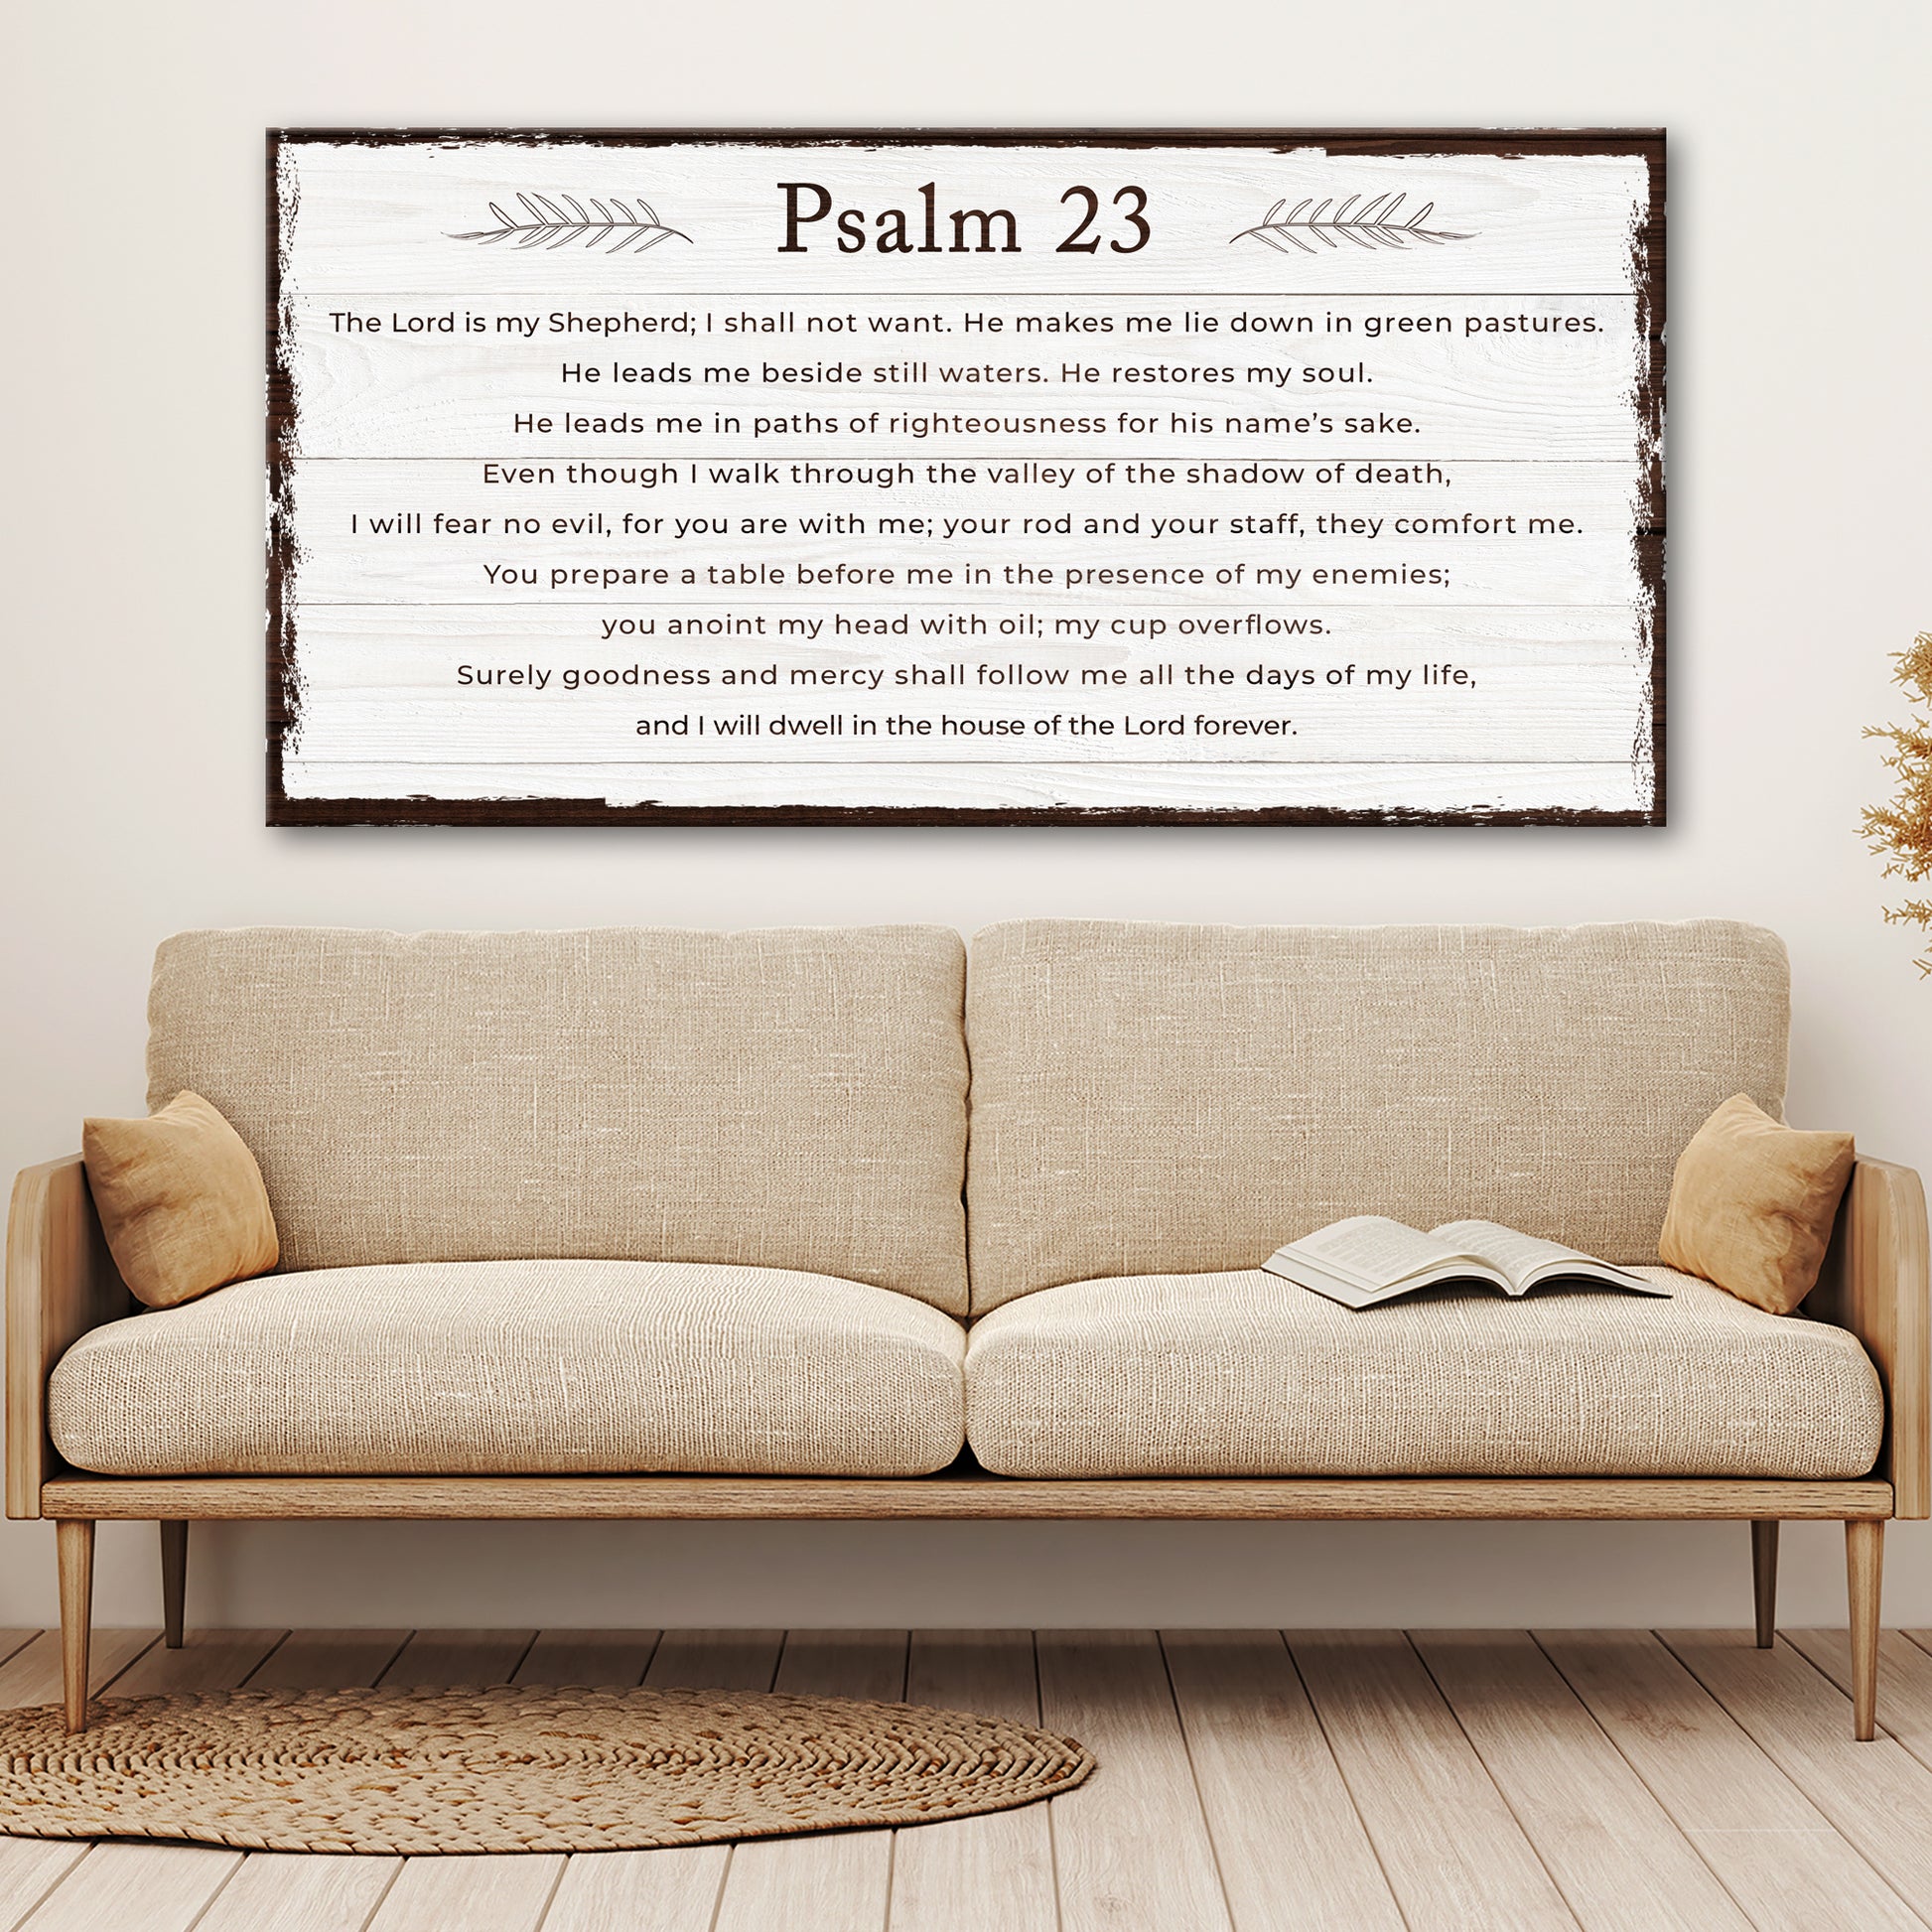 Psalm 23 - The Lord Is My Shepherd Sign - Image by Tailored Canvases